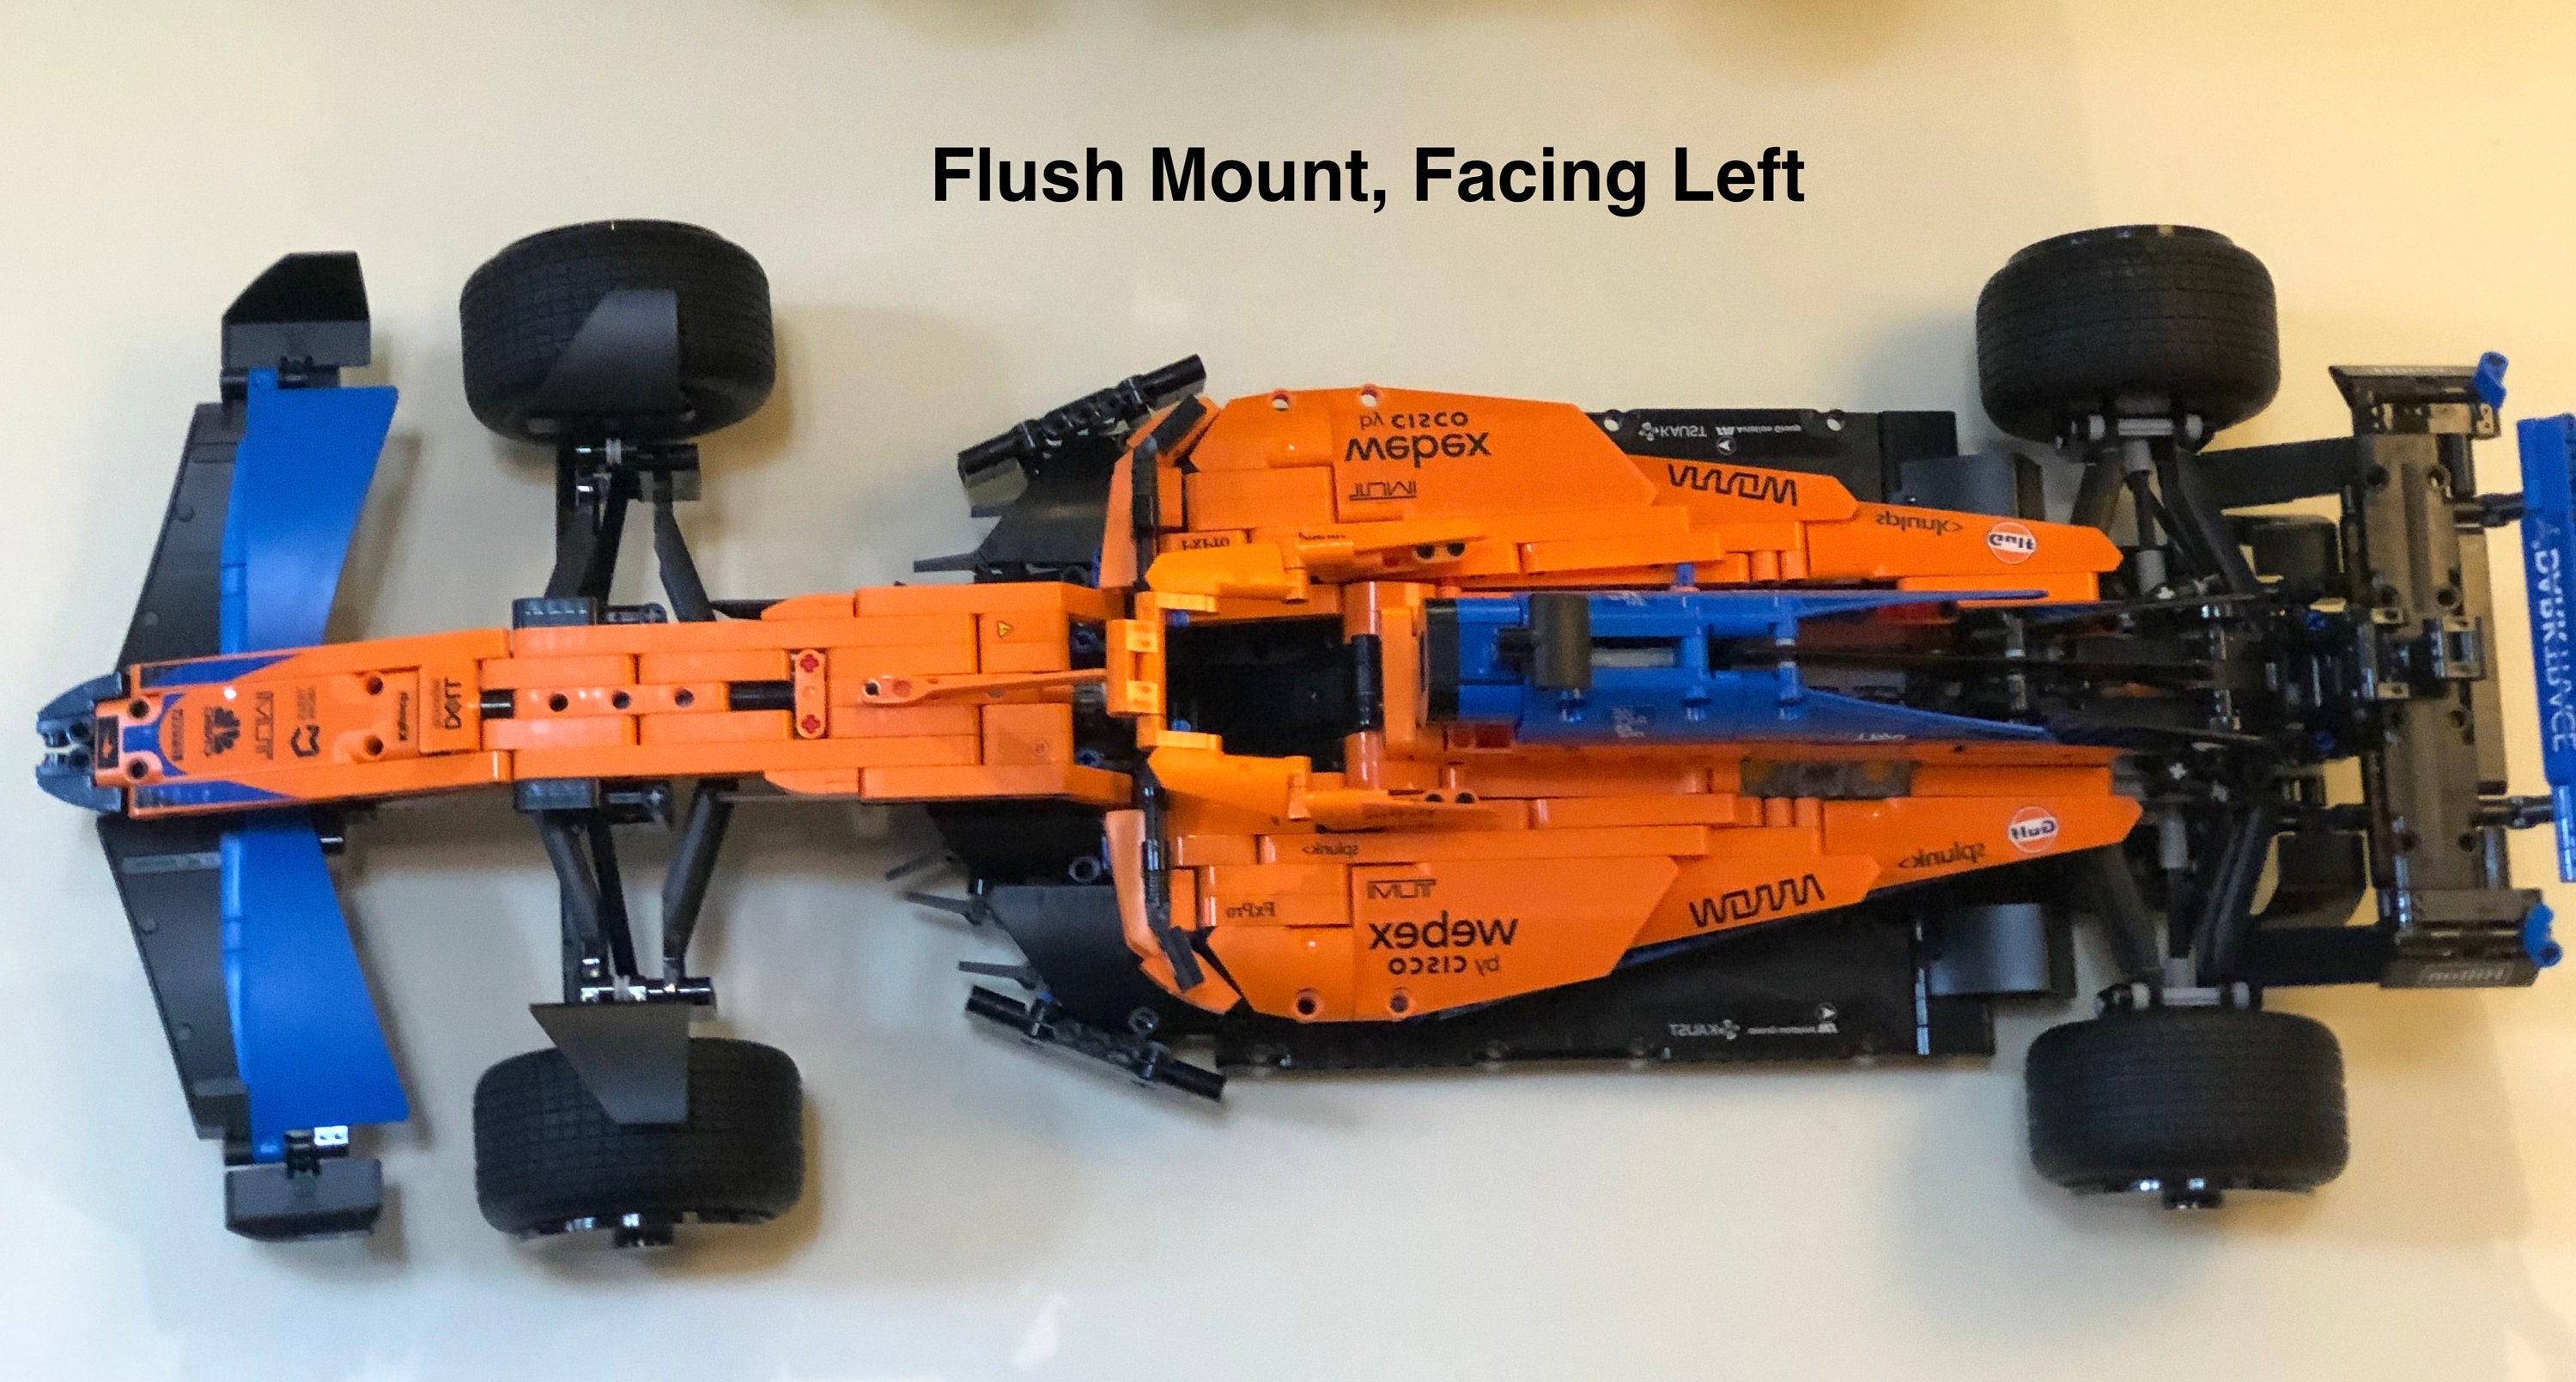 Wall Mounting Solution for Lego Technic Mclaren F1 42141. 